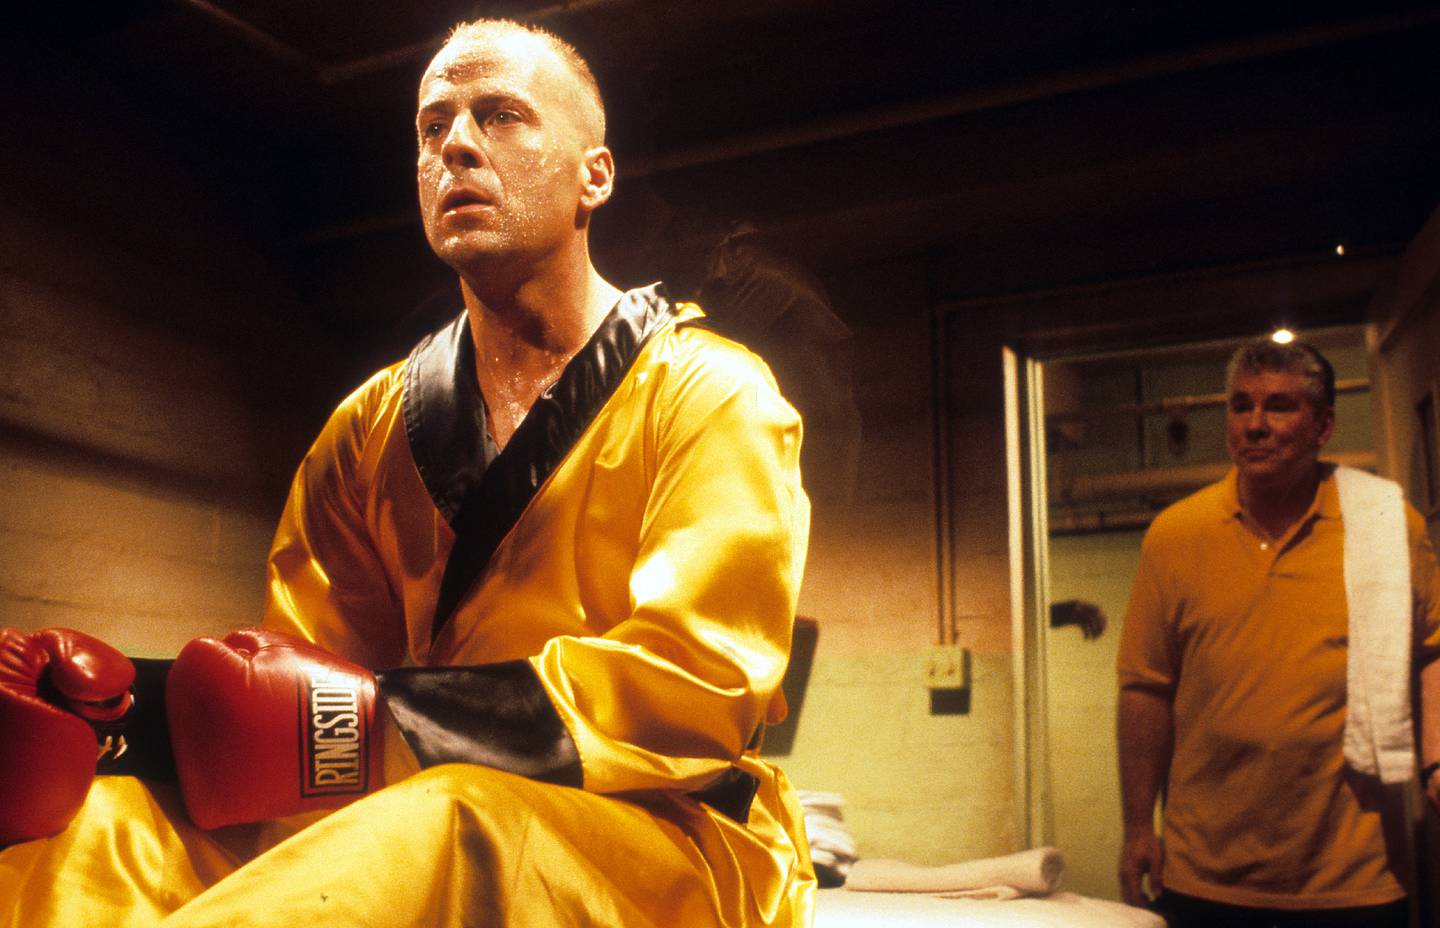 In Pulp Fiction, Bruce Willis plays Butch Coolidge, an aging boxer on the run from the gangster Marsellus (Ving Rhames) after having double-crossed him. Photo: Miramax Films